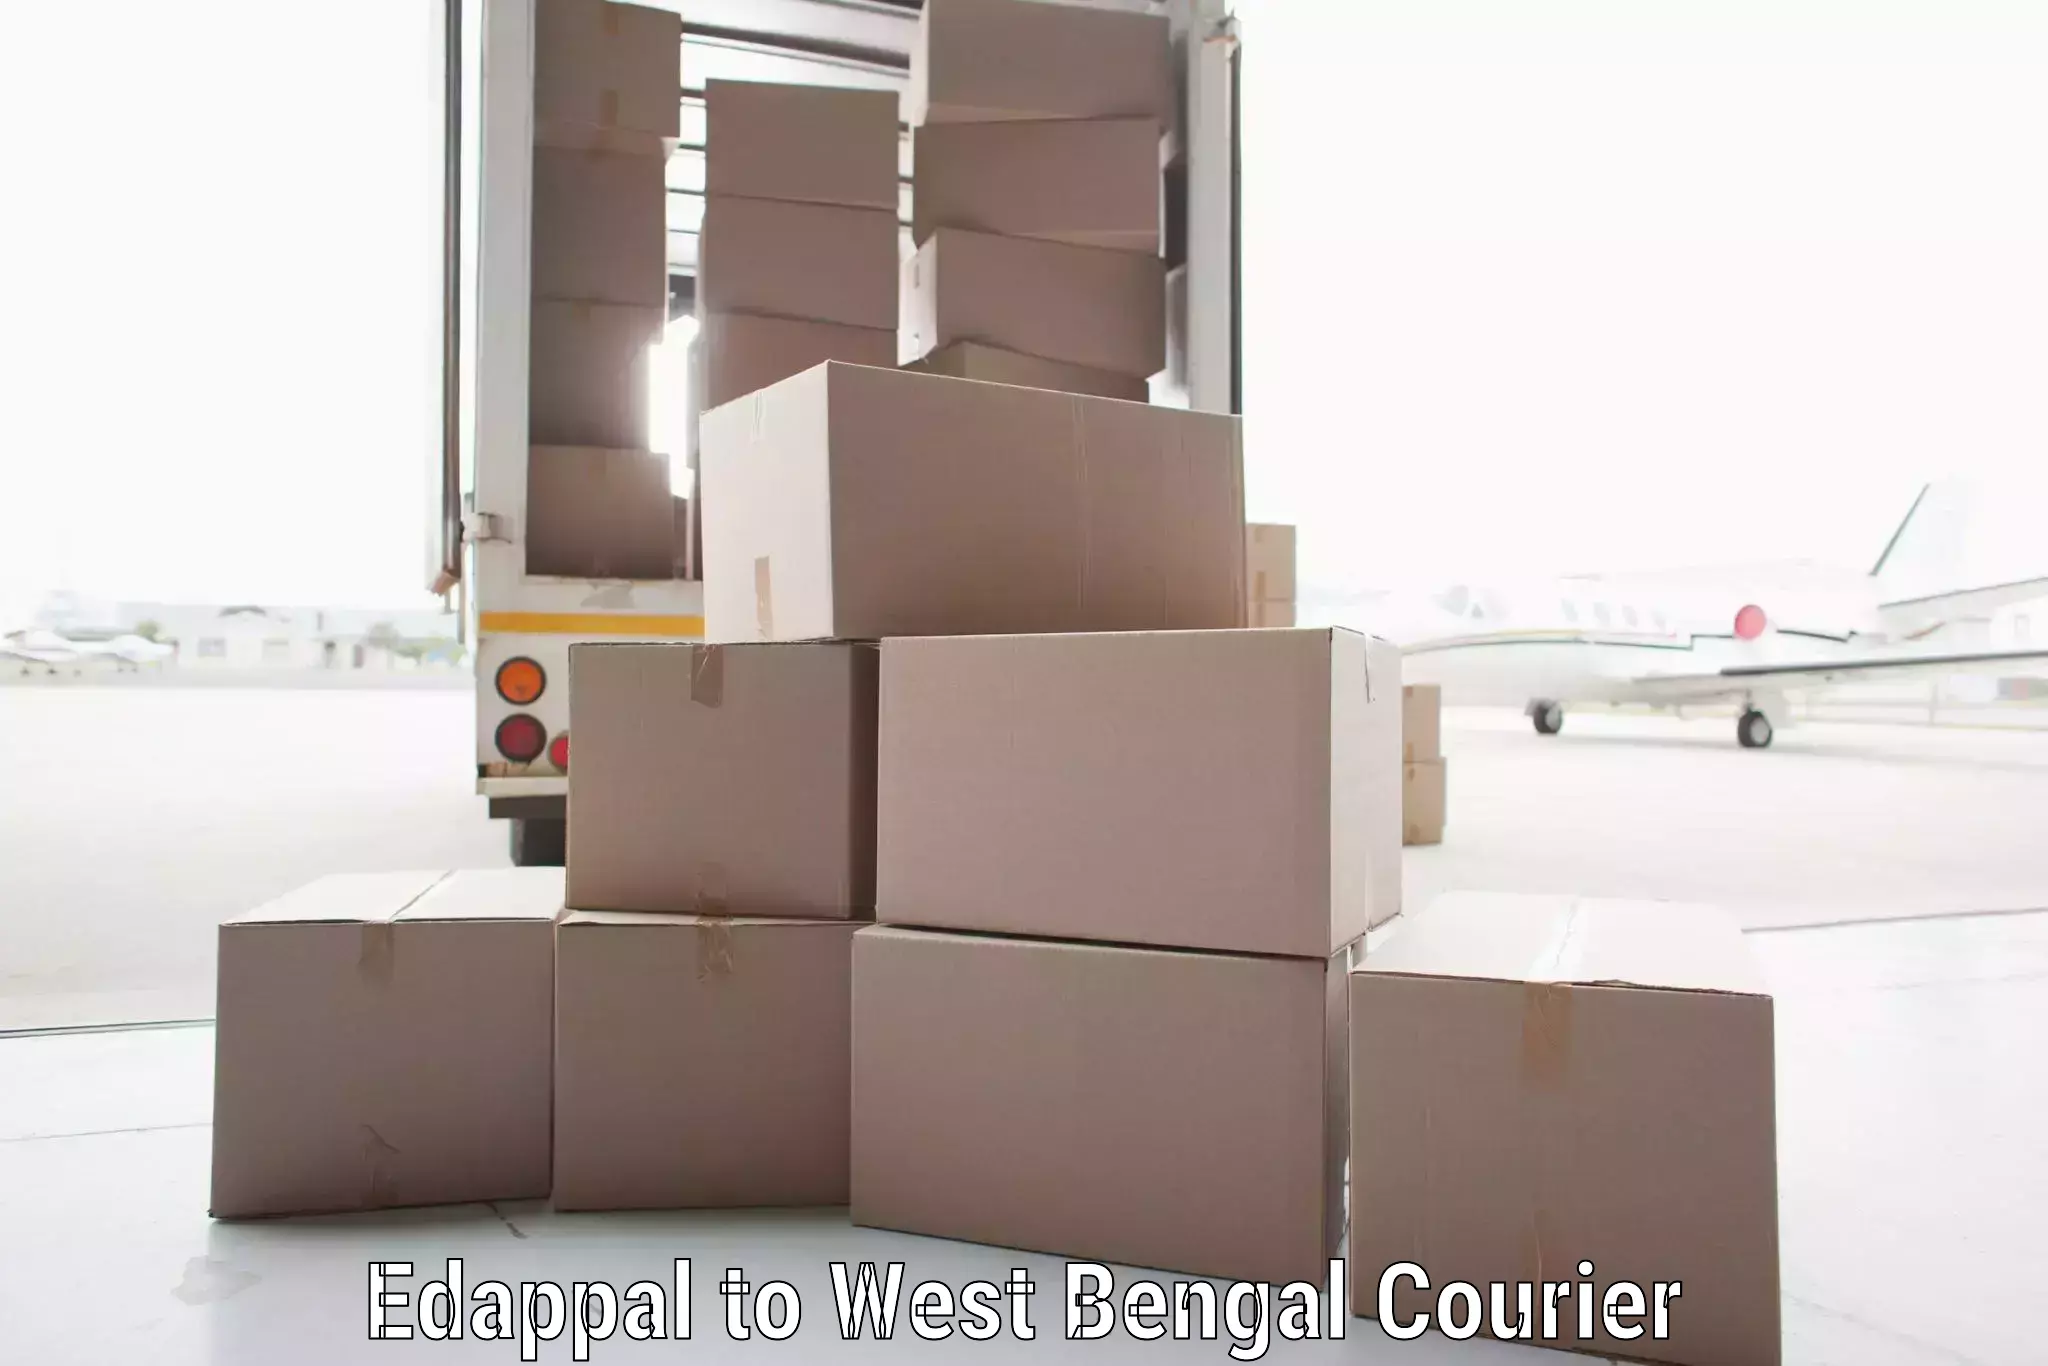 Courier service partnerships Edappal to Bagnan